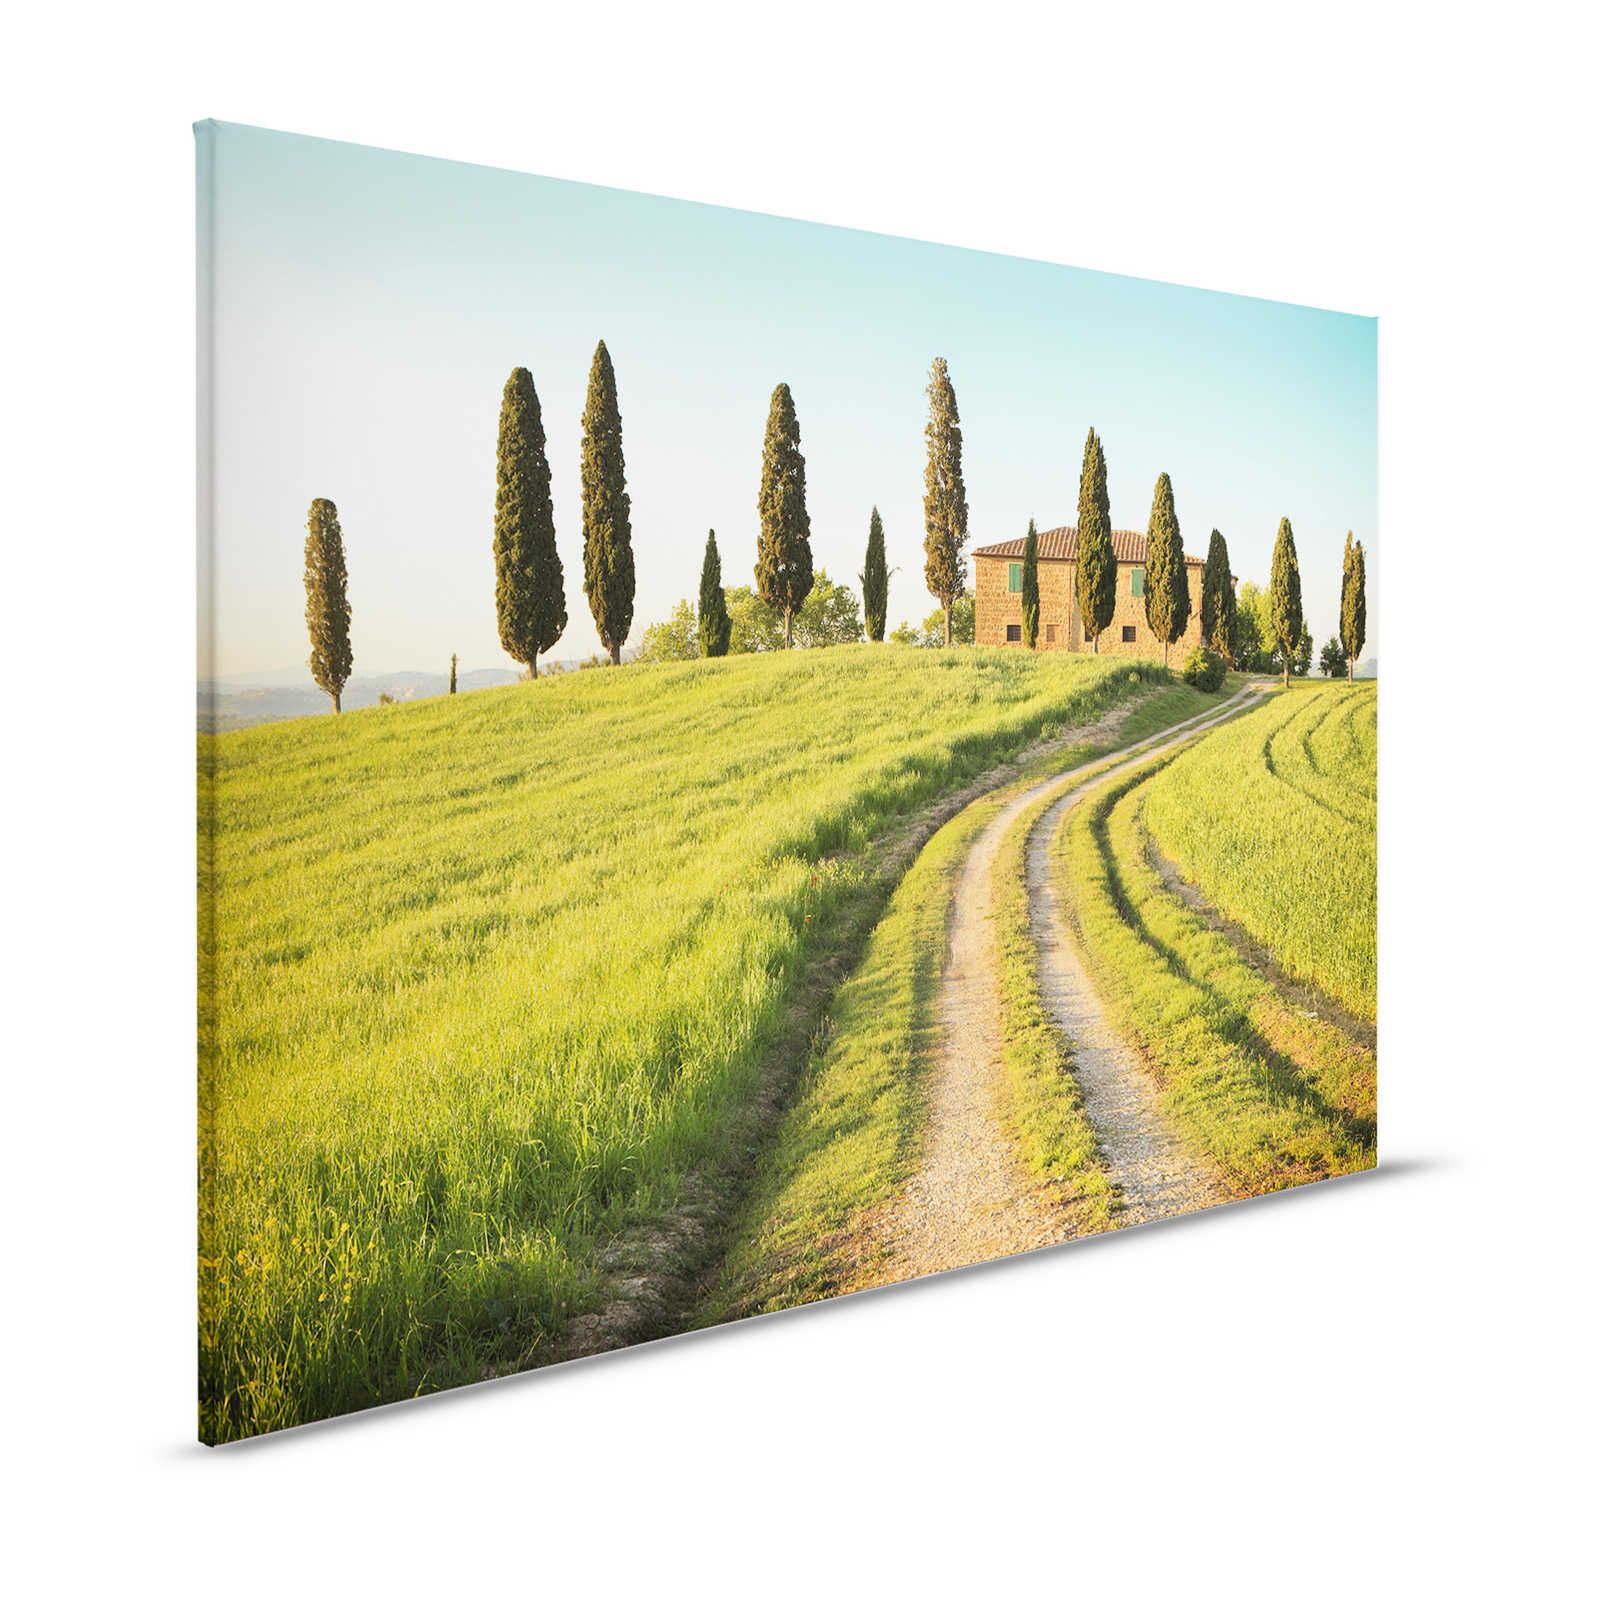 Canvas painting Villa with cypresses in Tuscany - 1.20 m x 0.80 m
